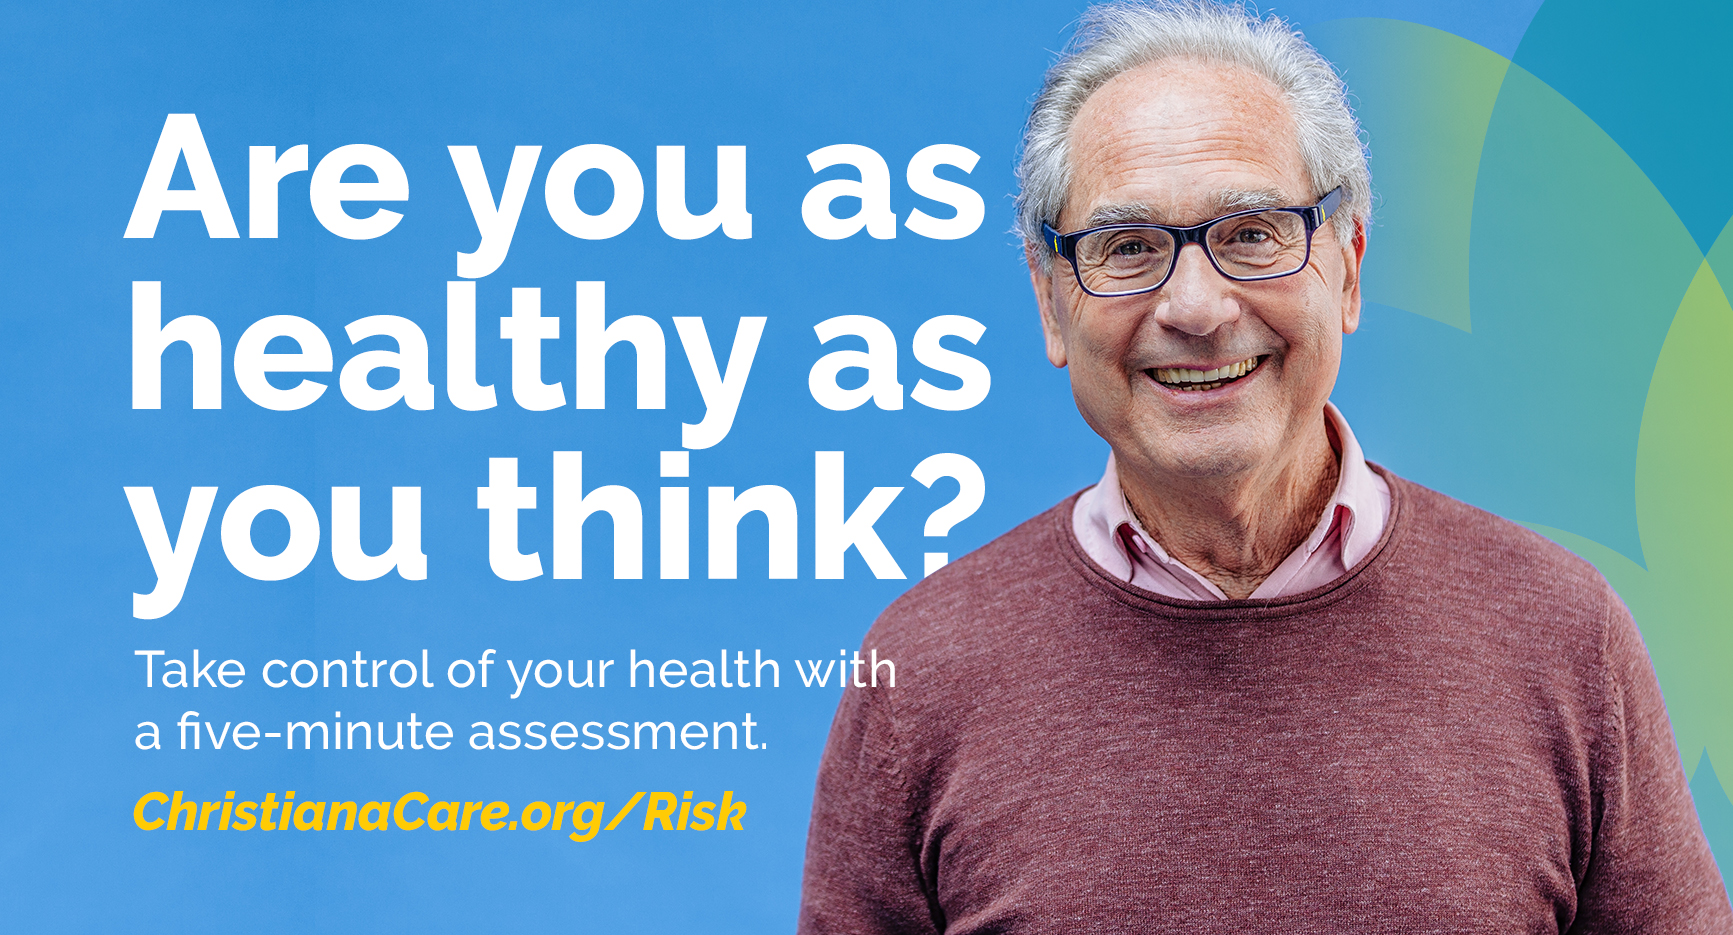 Are you as healthy as you think? Take control of you health with a five-minute assessment.